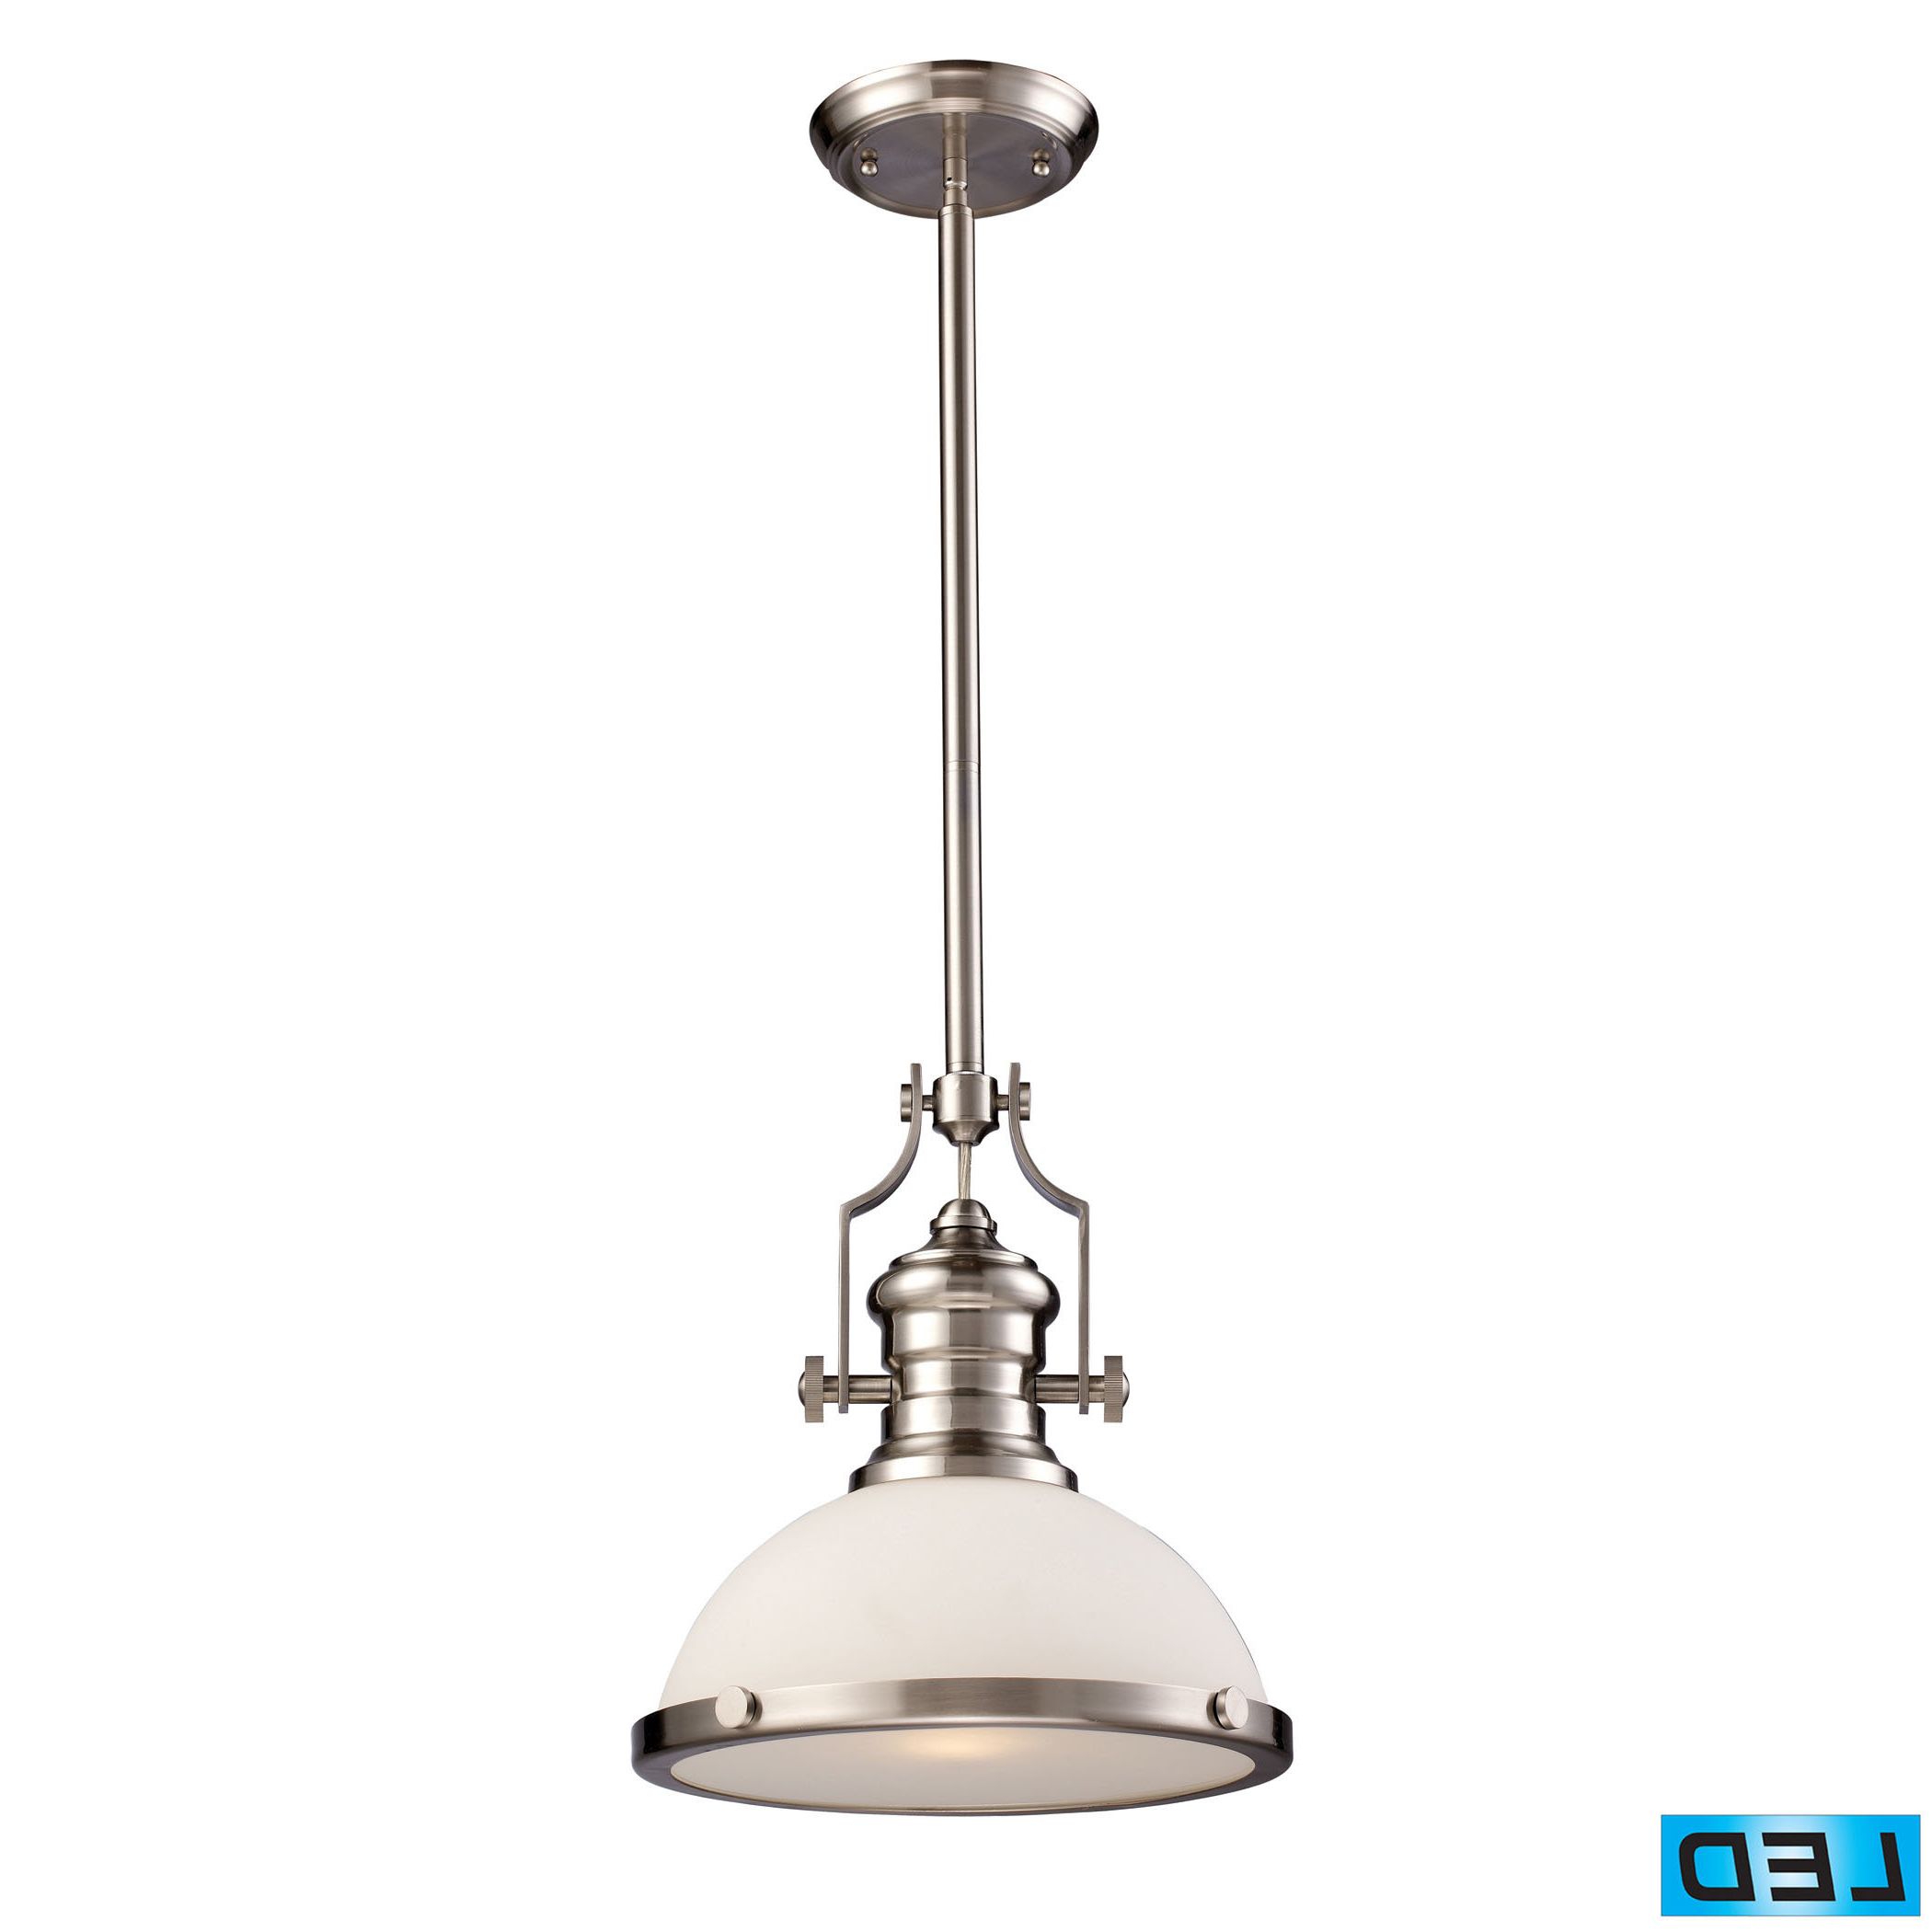 Priston 1 Light Single Dome Pendant Intended For Recent Priston 1 Light Single Dome Pendants (Photo 1 of 25)